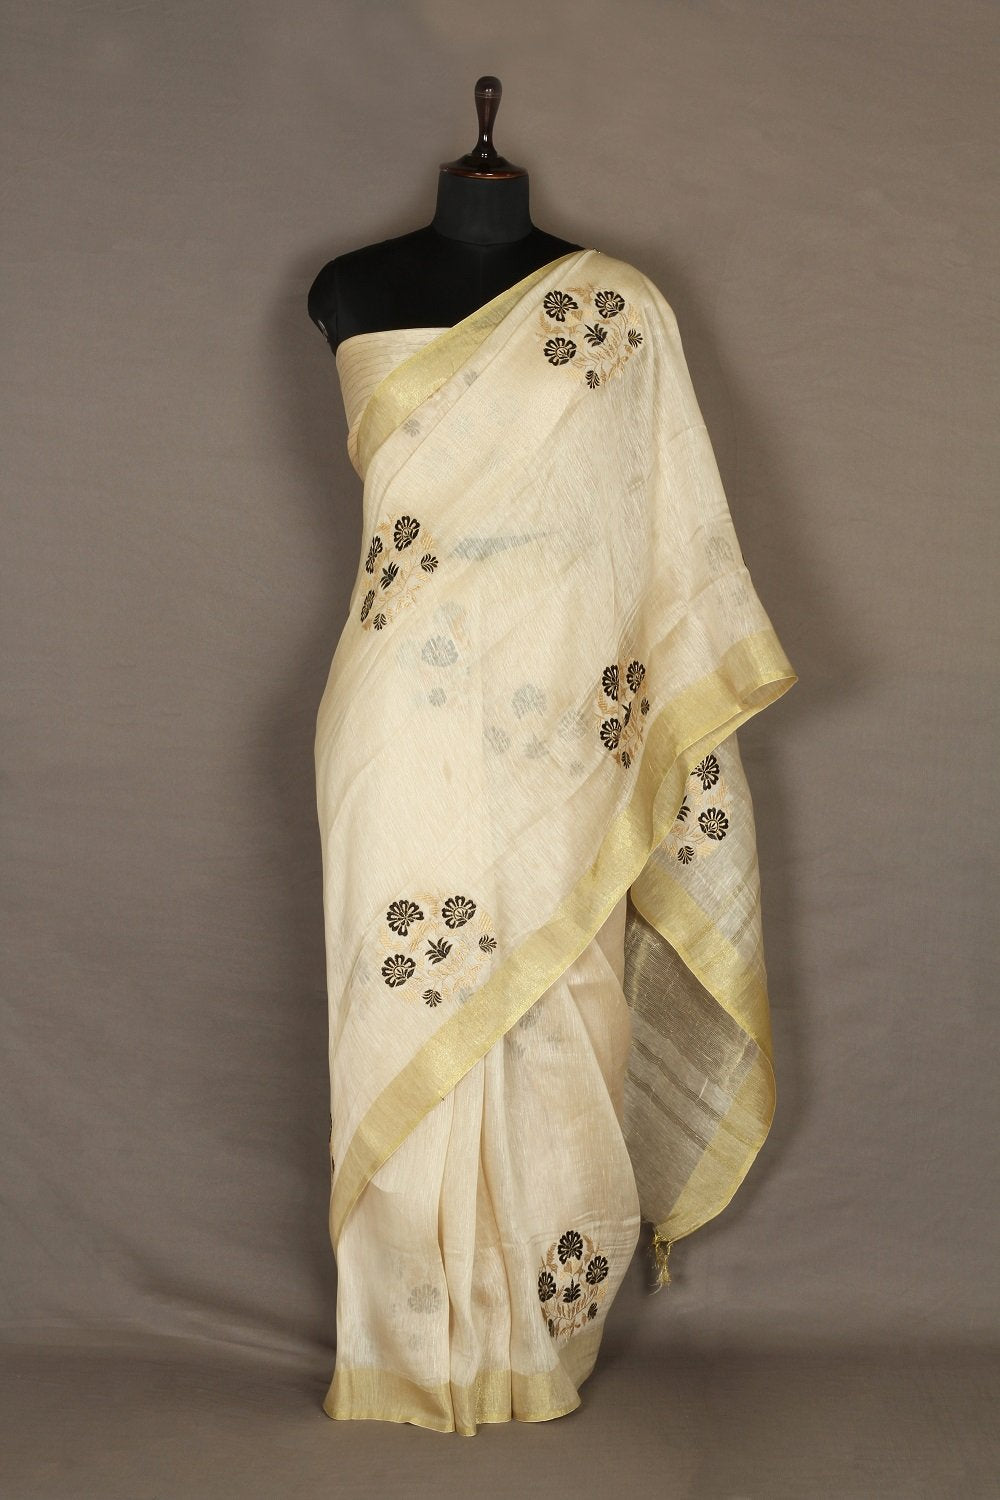 Off White shade Handwoven Organic Linen Saree with Embroidery Work | KIHUMS Saree